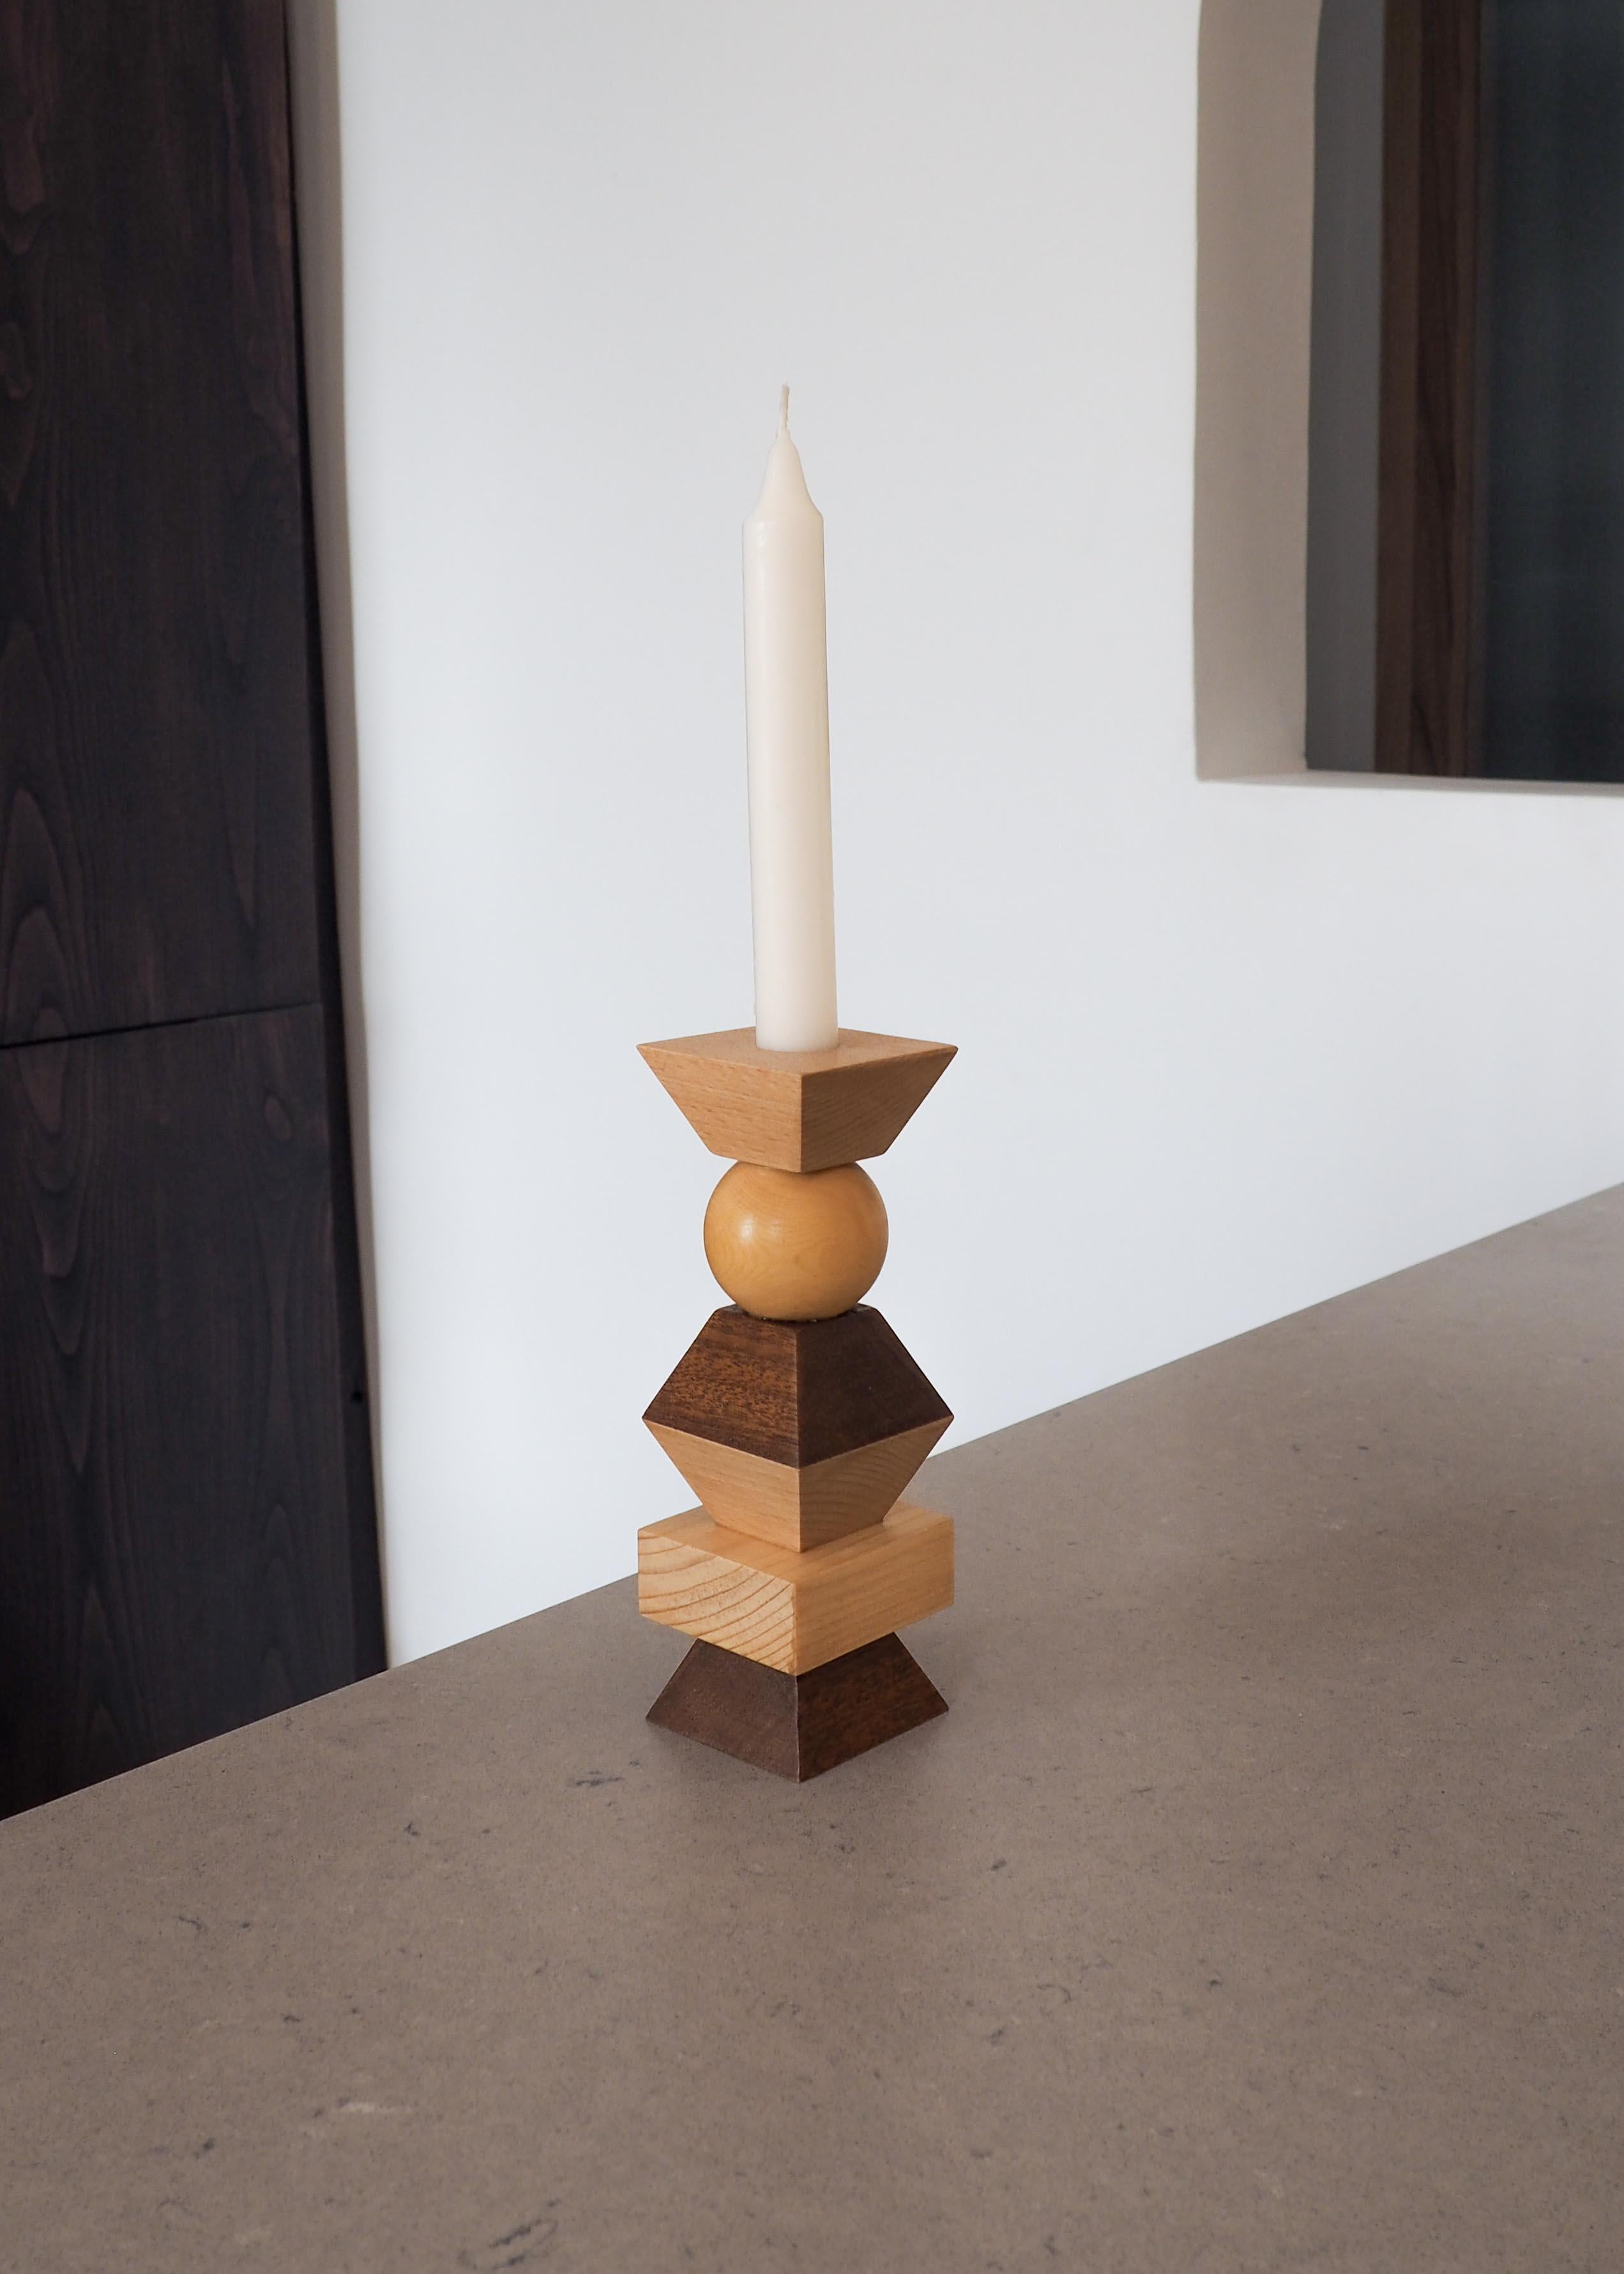 This Totem candlestick is made up of different local essences: Boxwood, Beech, Melia and Pine. It was produced in the Languedoc, in France. Its geometric shapes make it a sculptural object. A satin varnish has been applied to protect the wood. There